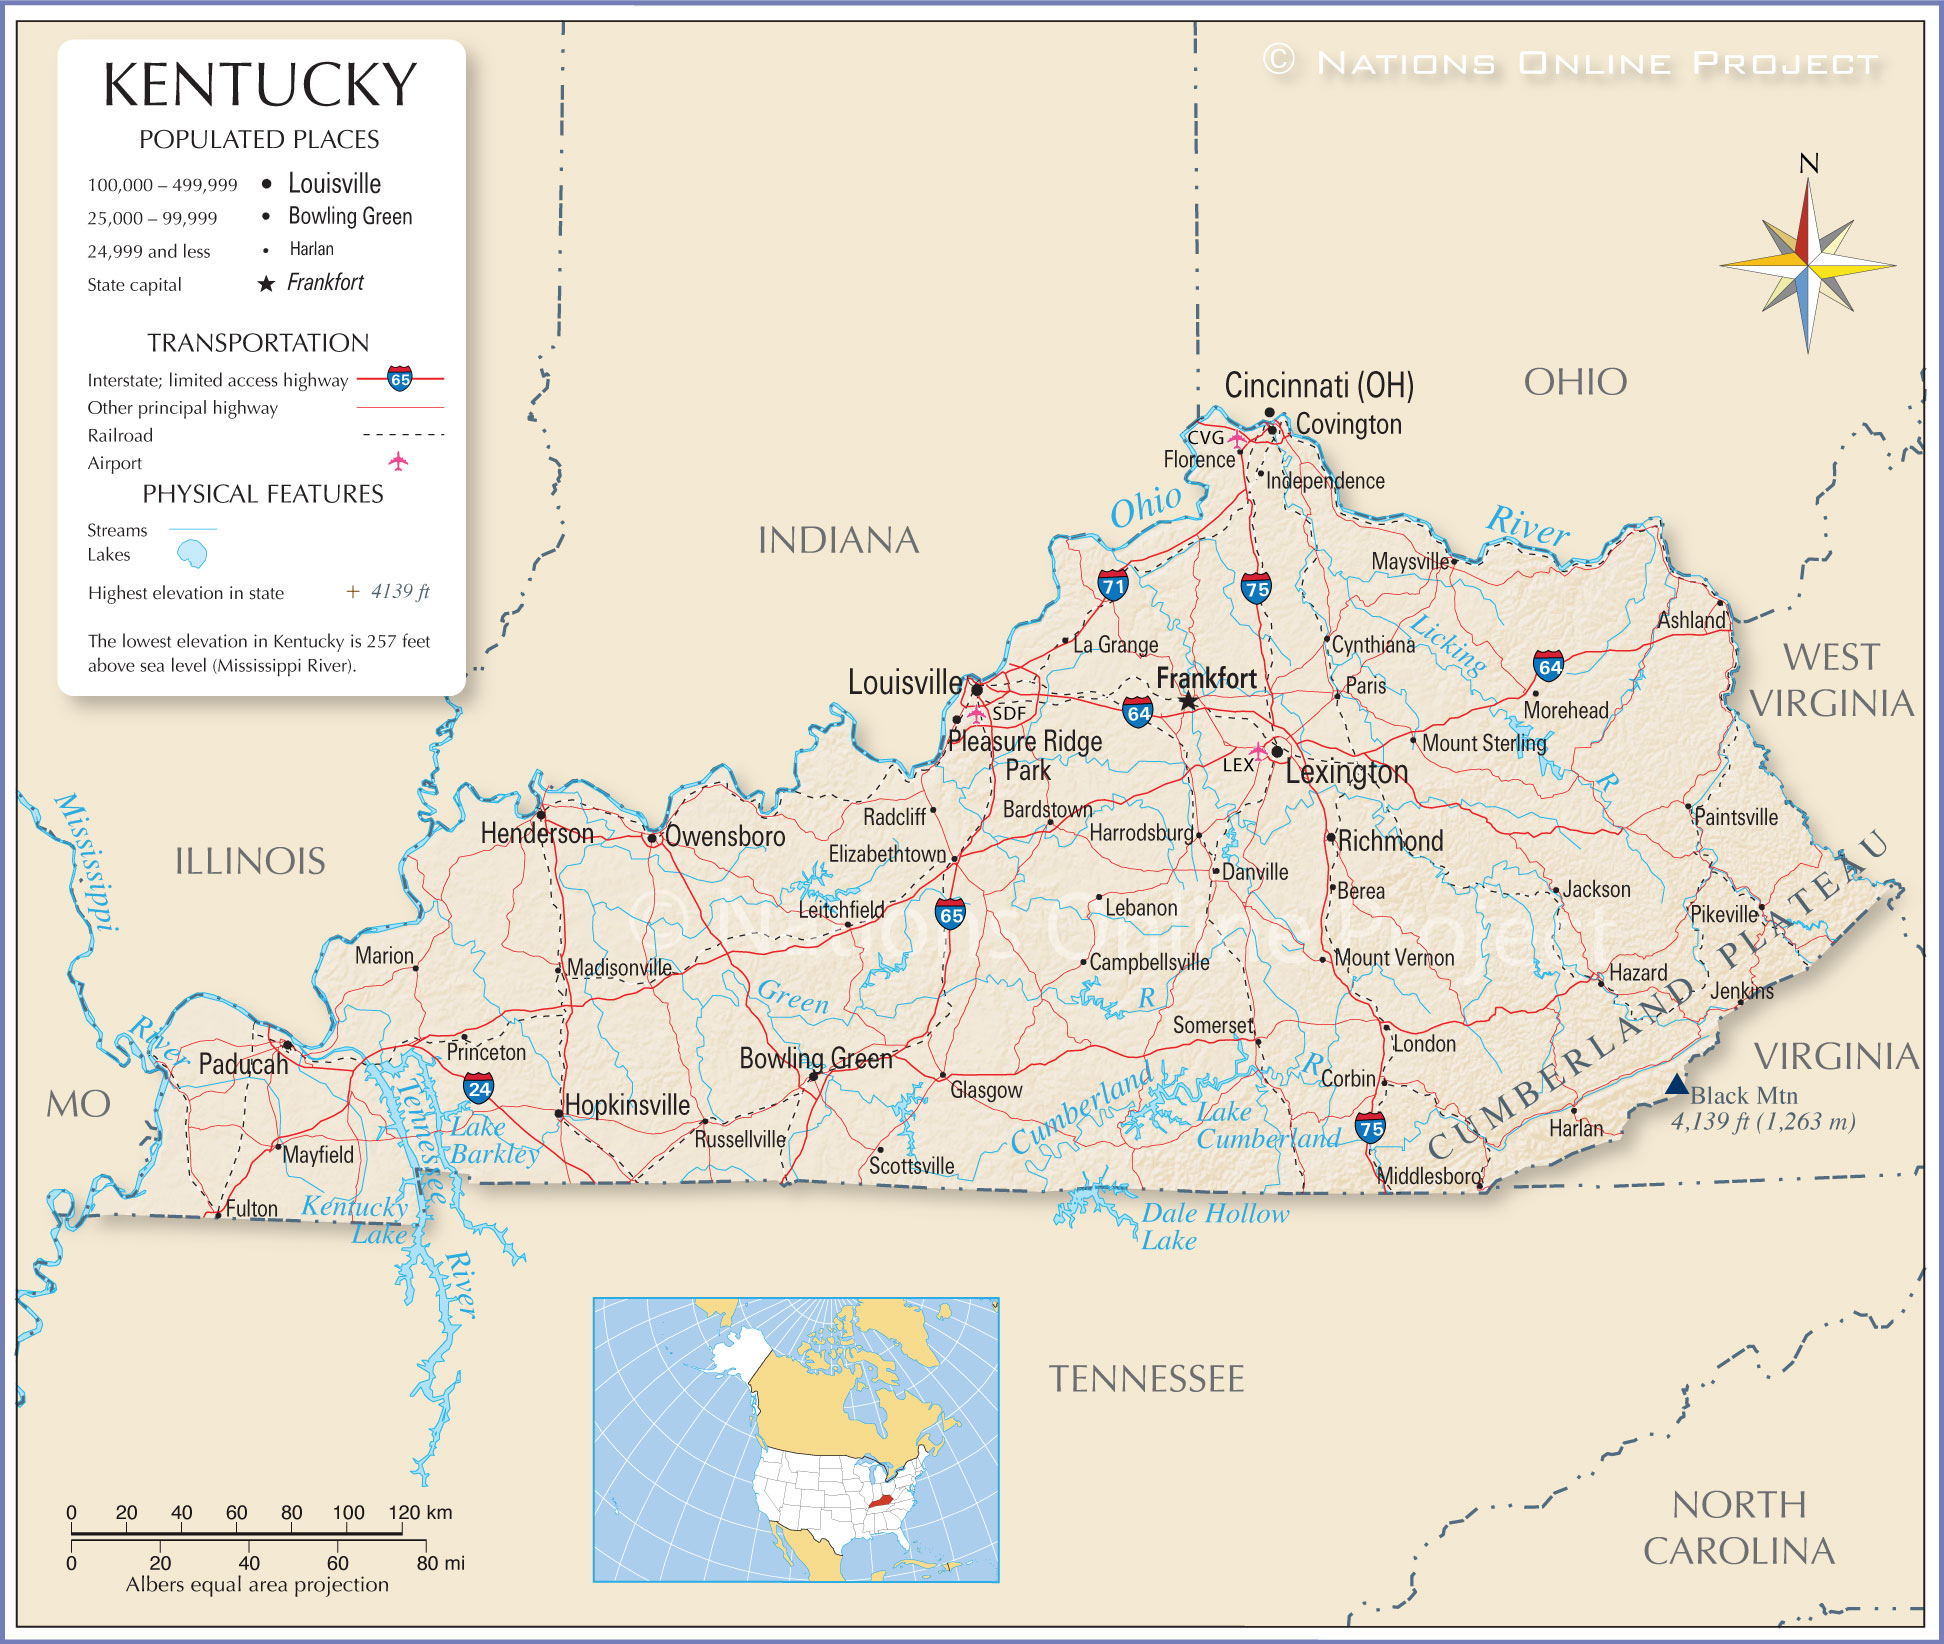 Indiana Kentucky Map With Cities Map Of The State Of Kentucky, Usa - Nations Online Project